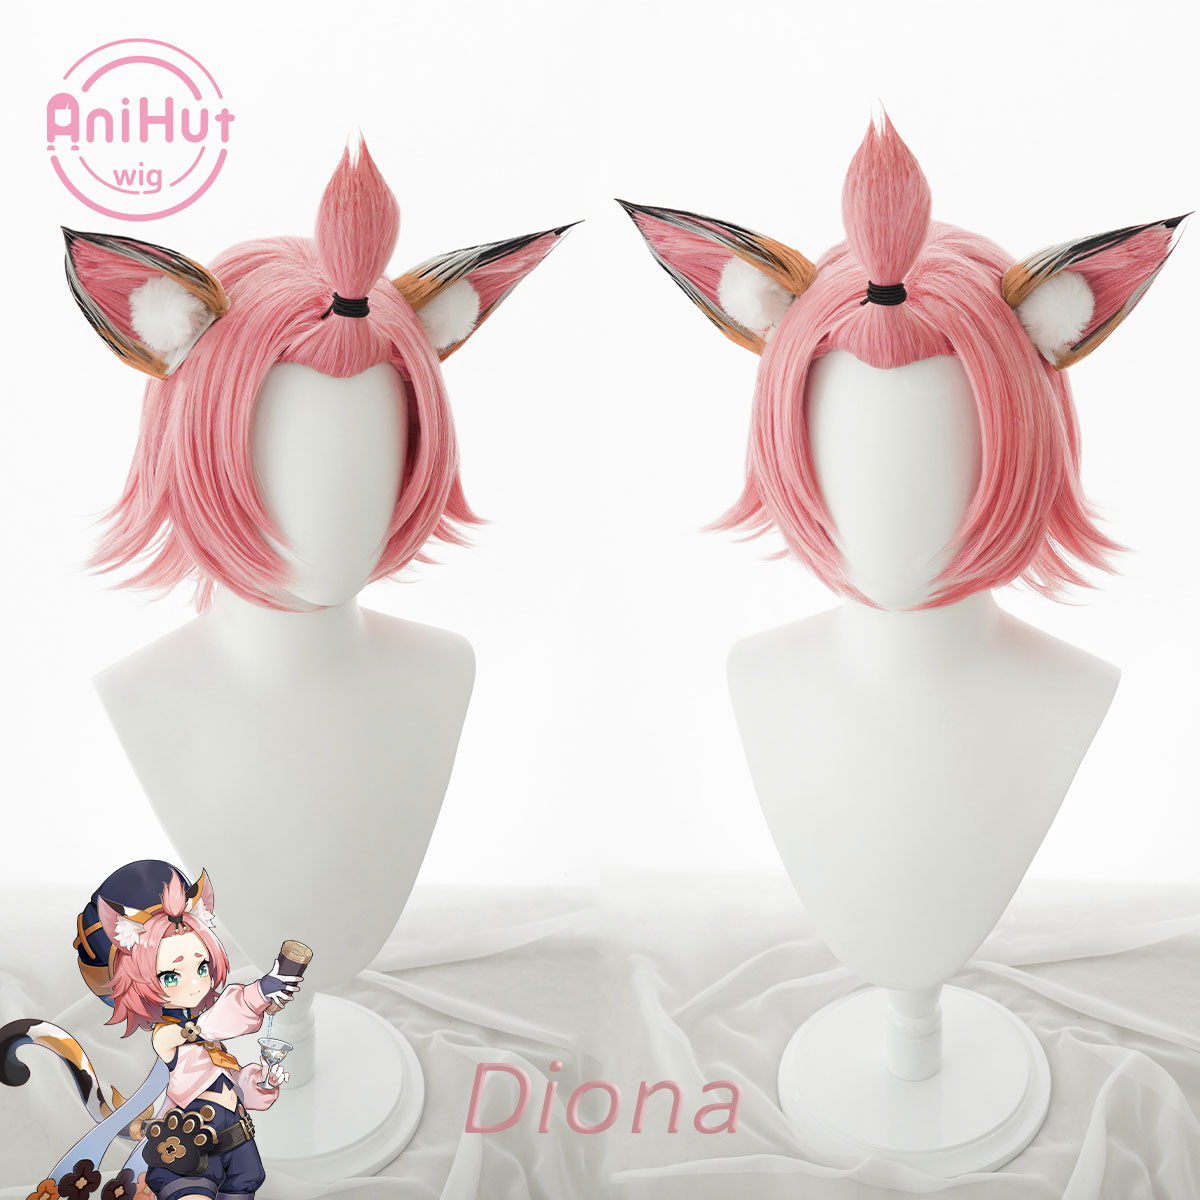 Details about   Game Genshin Impact Diona Reverse warp Hair Wig  Heat Resistant Synthetic Wig 